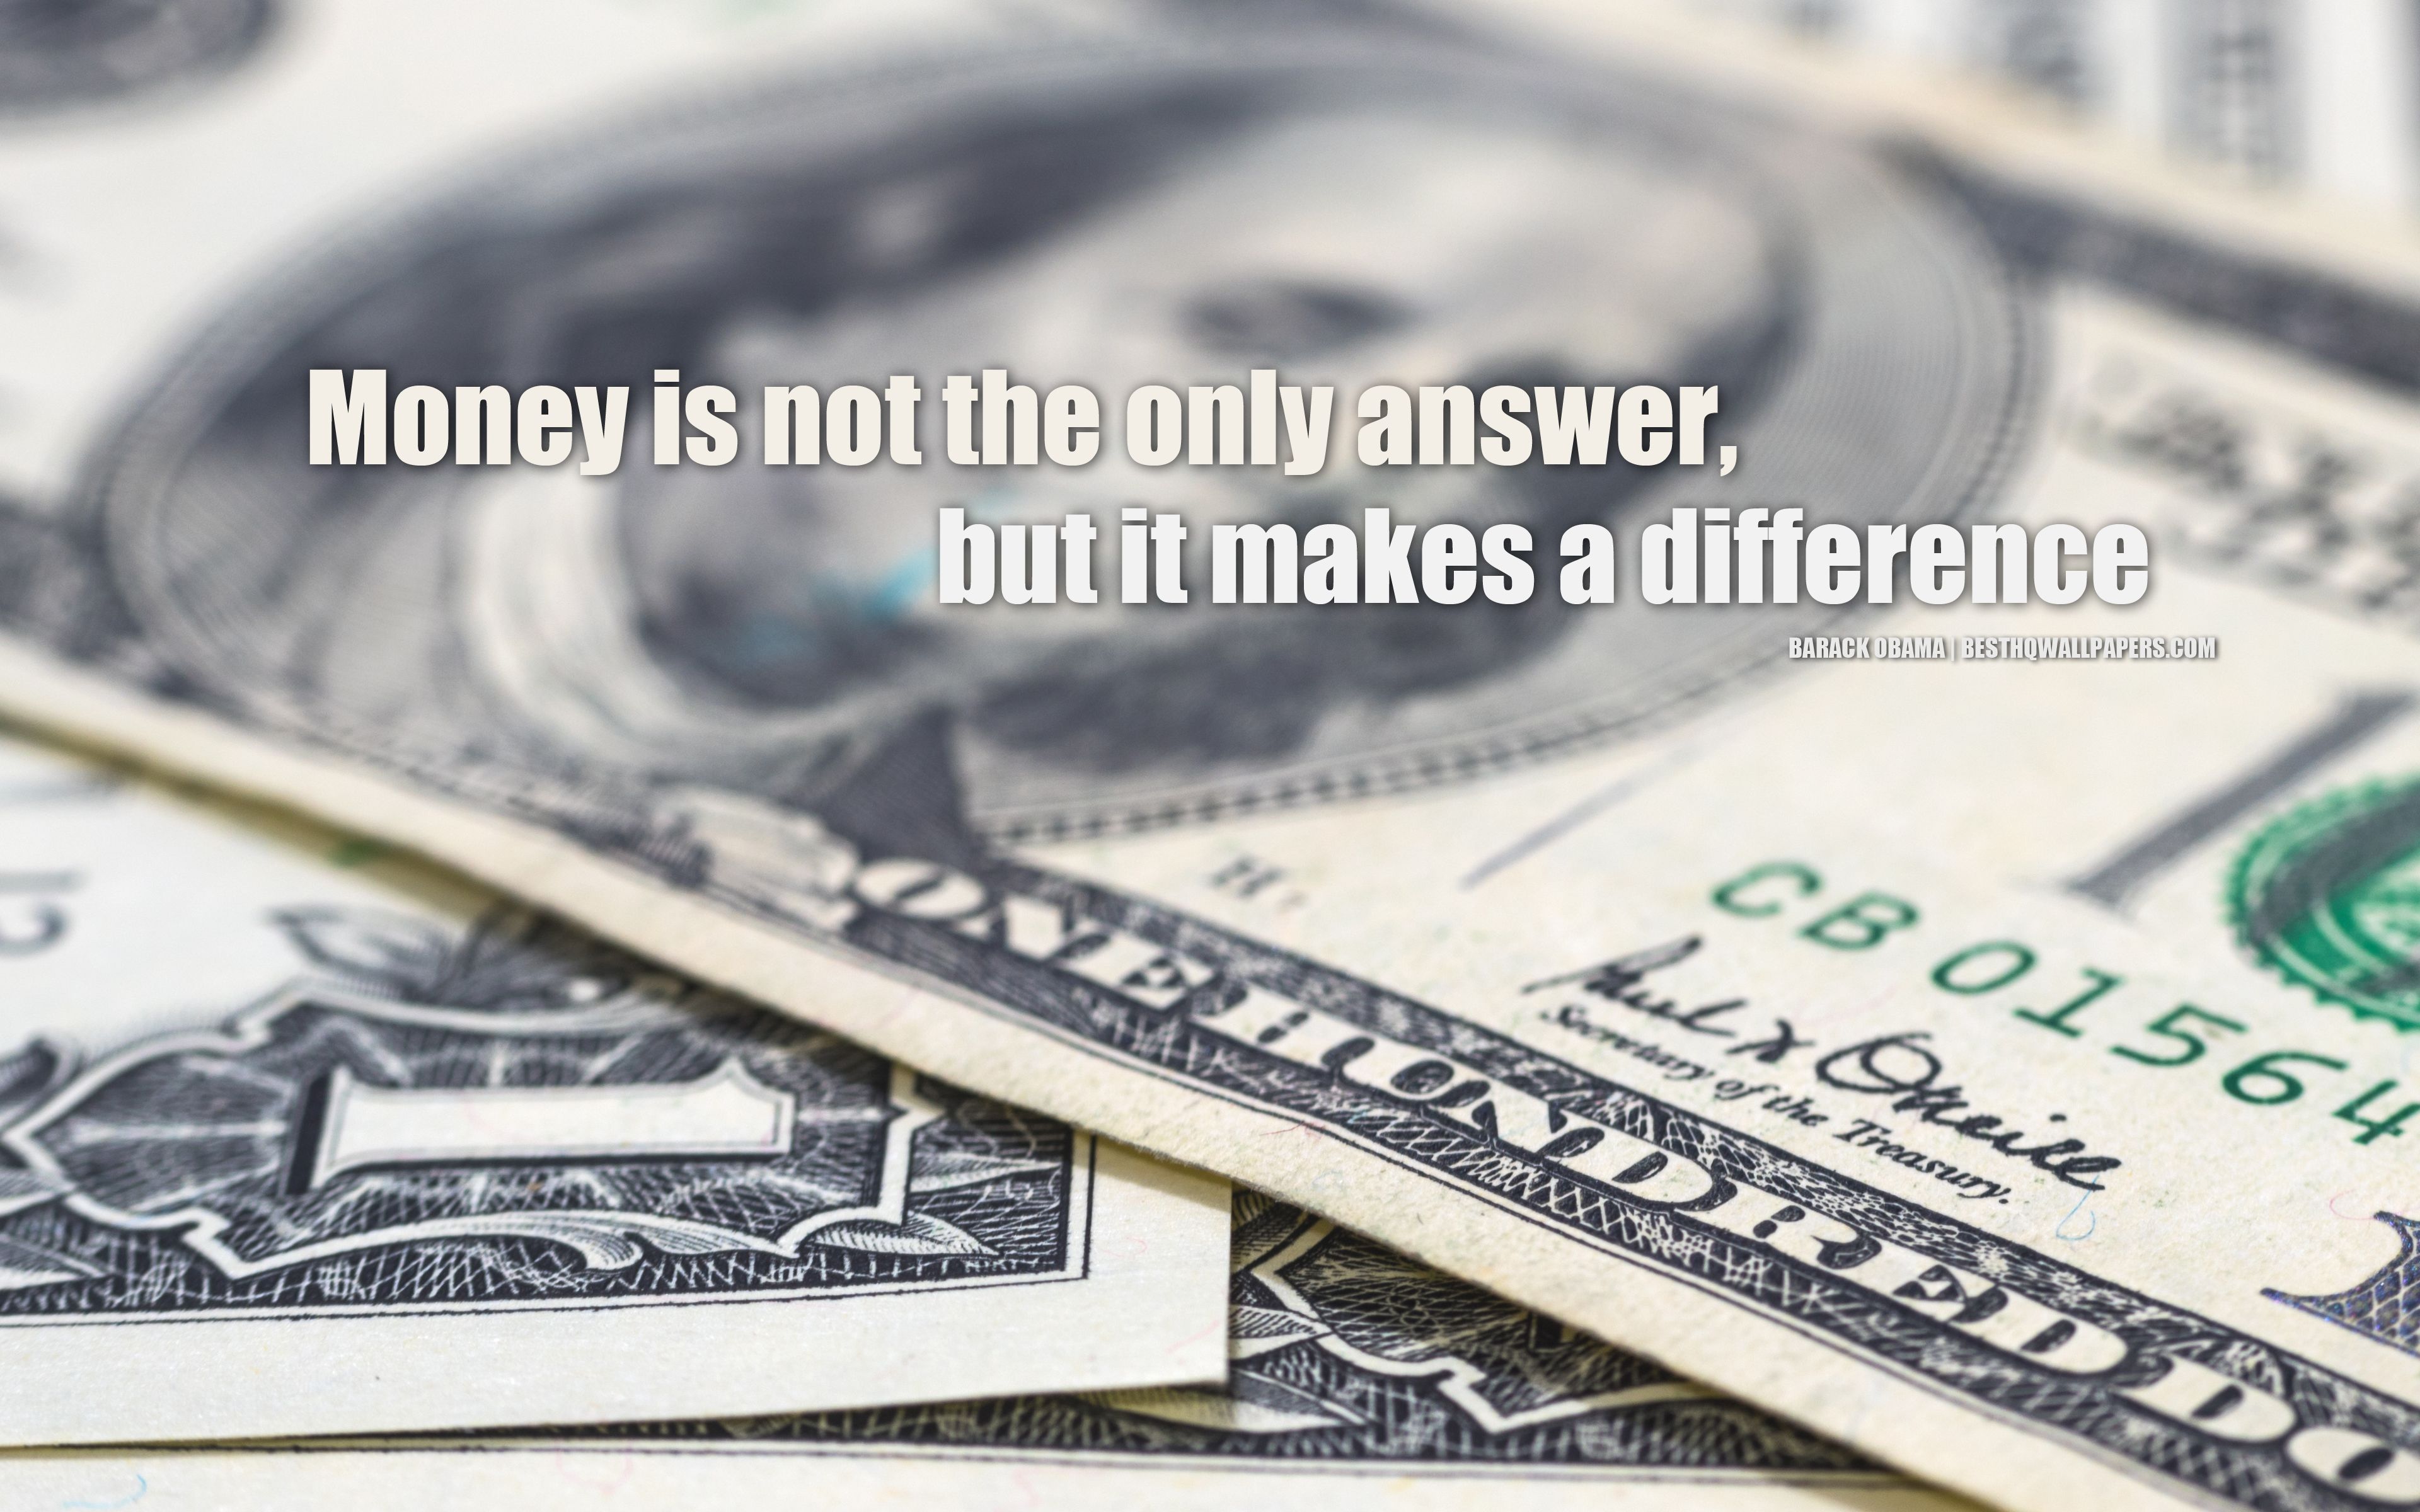 Download wallpaper Money is not the only answer, but it makes a difference, Barack Obama quotes, quotes about money, business, finances, motivation, inspiration, 4k for desktop with resolution 3840x2400. High Quality HD